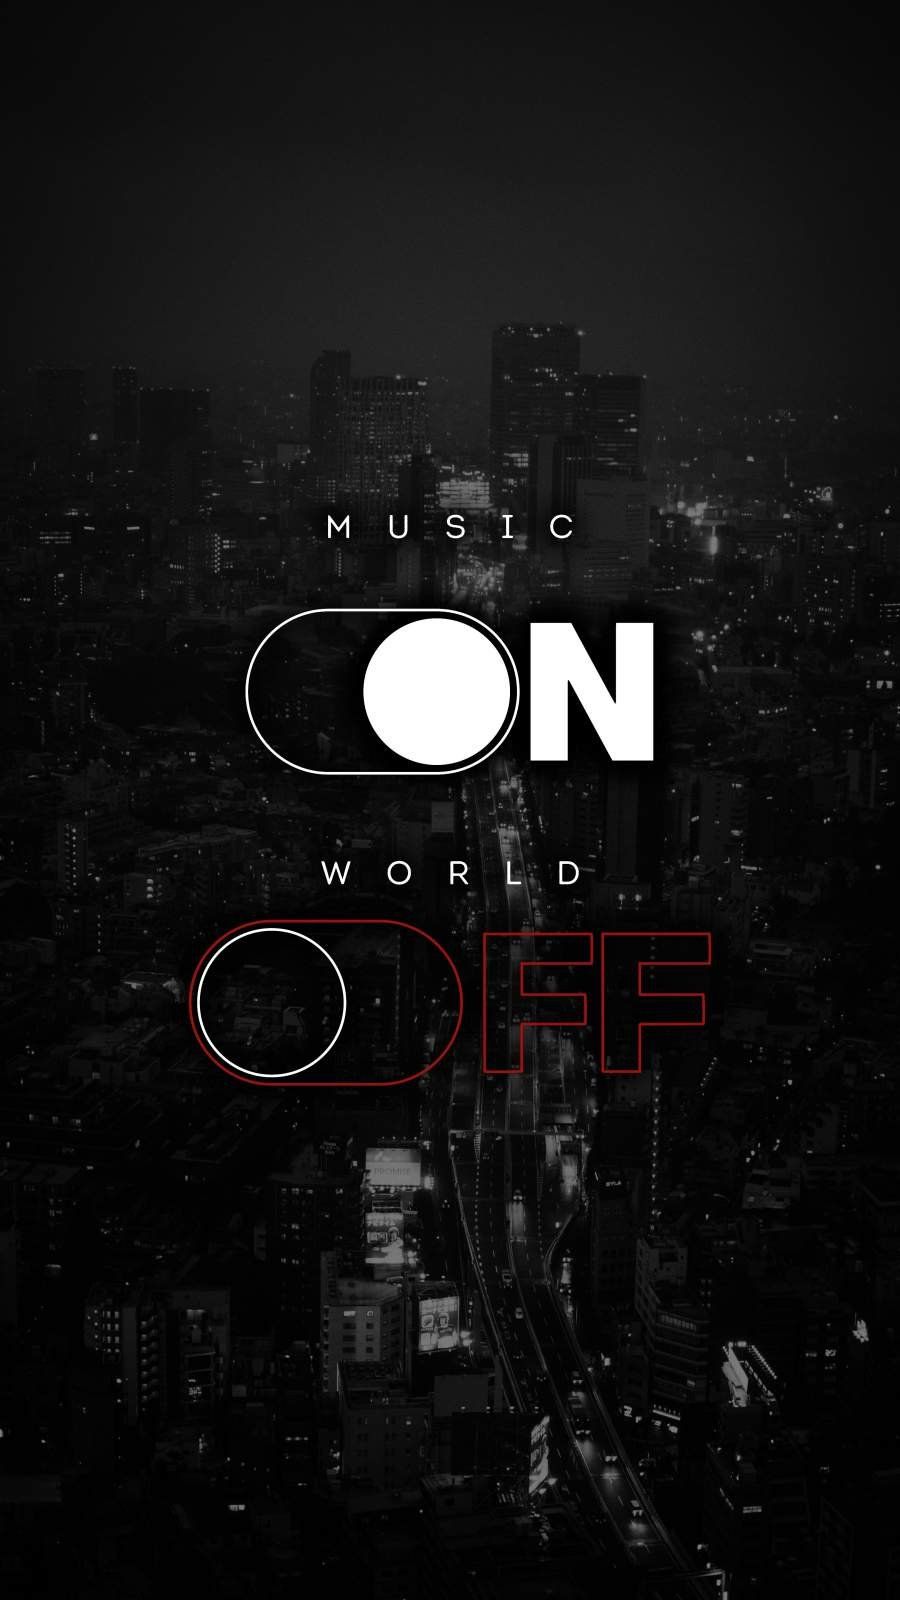 Music on world off aesthetic Wallpaper Download